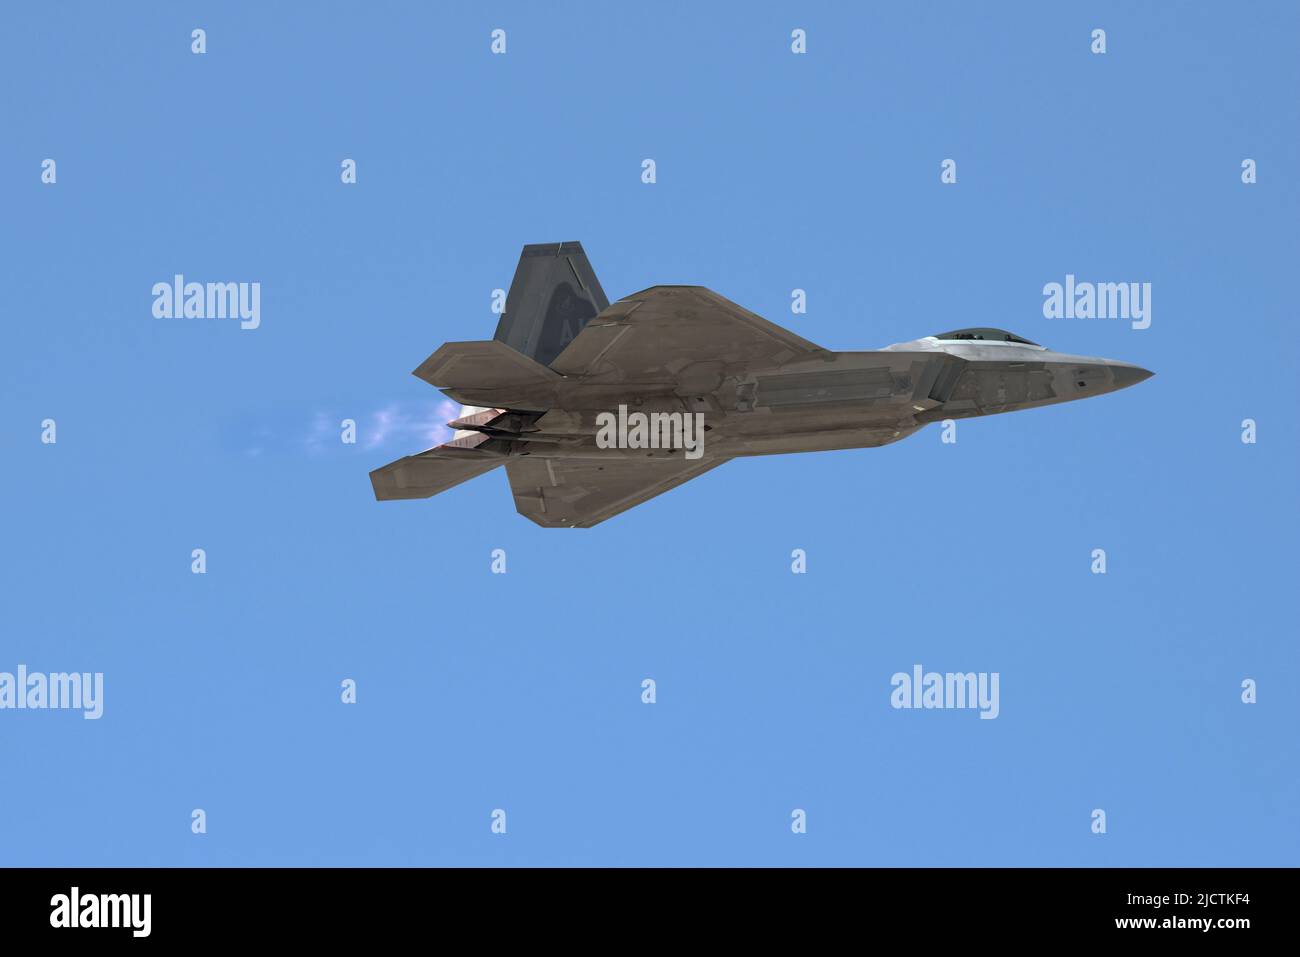 Lockheed Martin F-22 Raptor with registration 07-4131 or AF07-131 shown during a low pass over .Lancaster, California, USA on March 24, 2018. Stock Photo